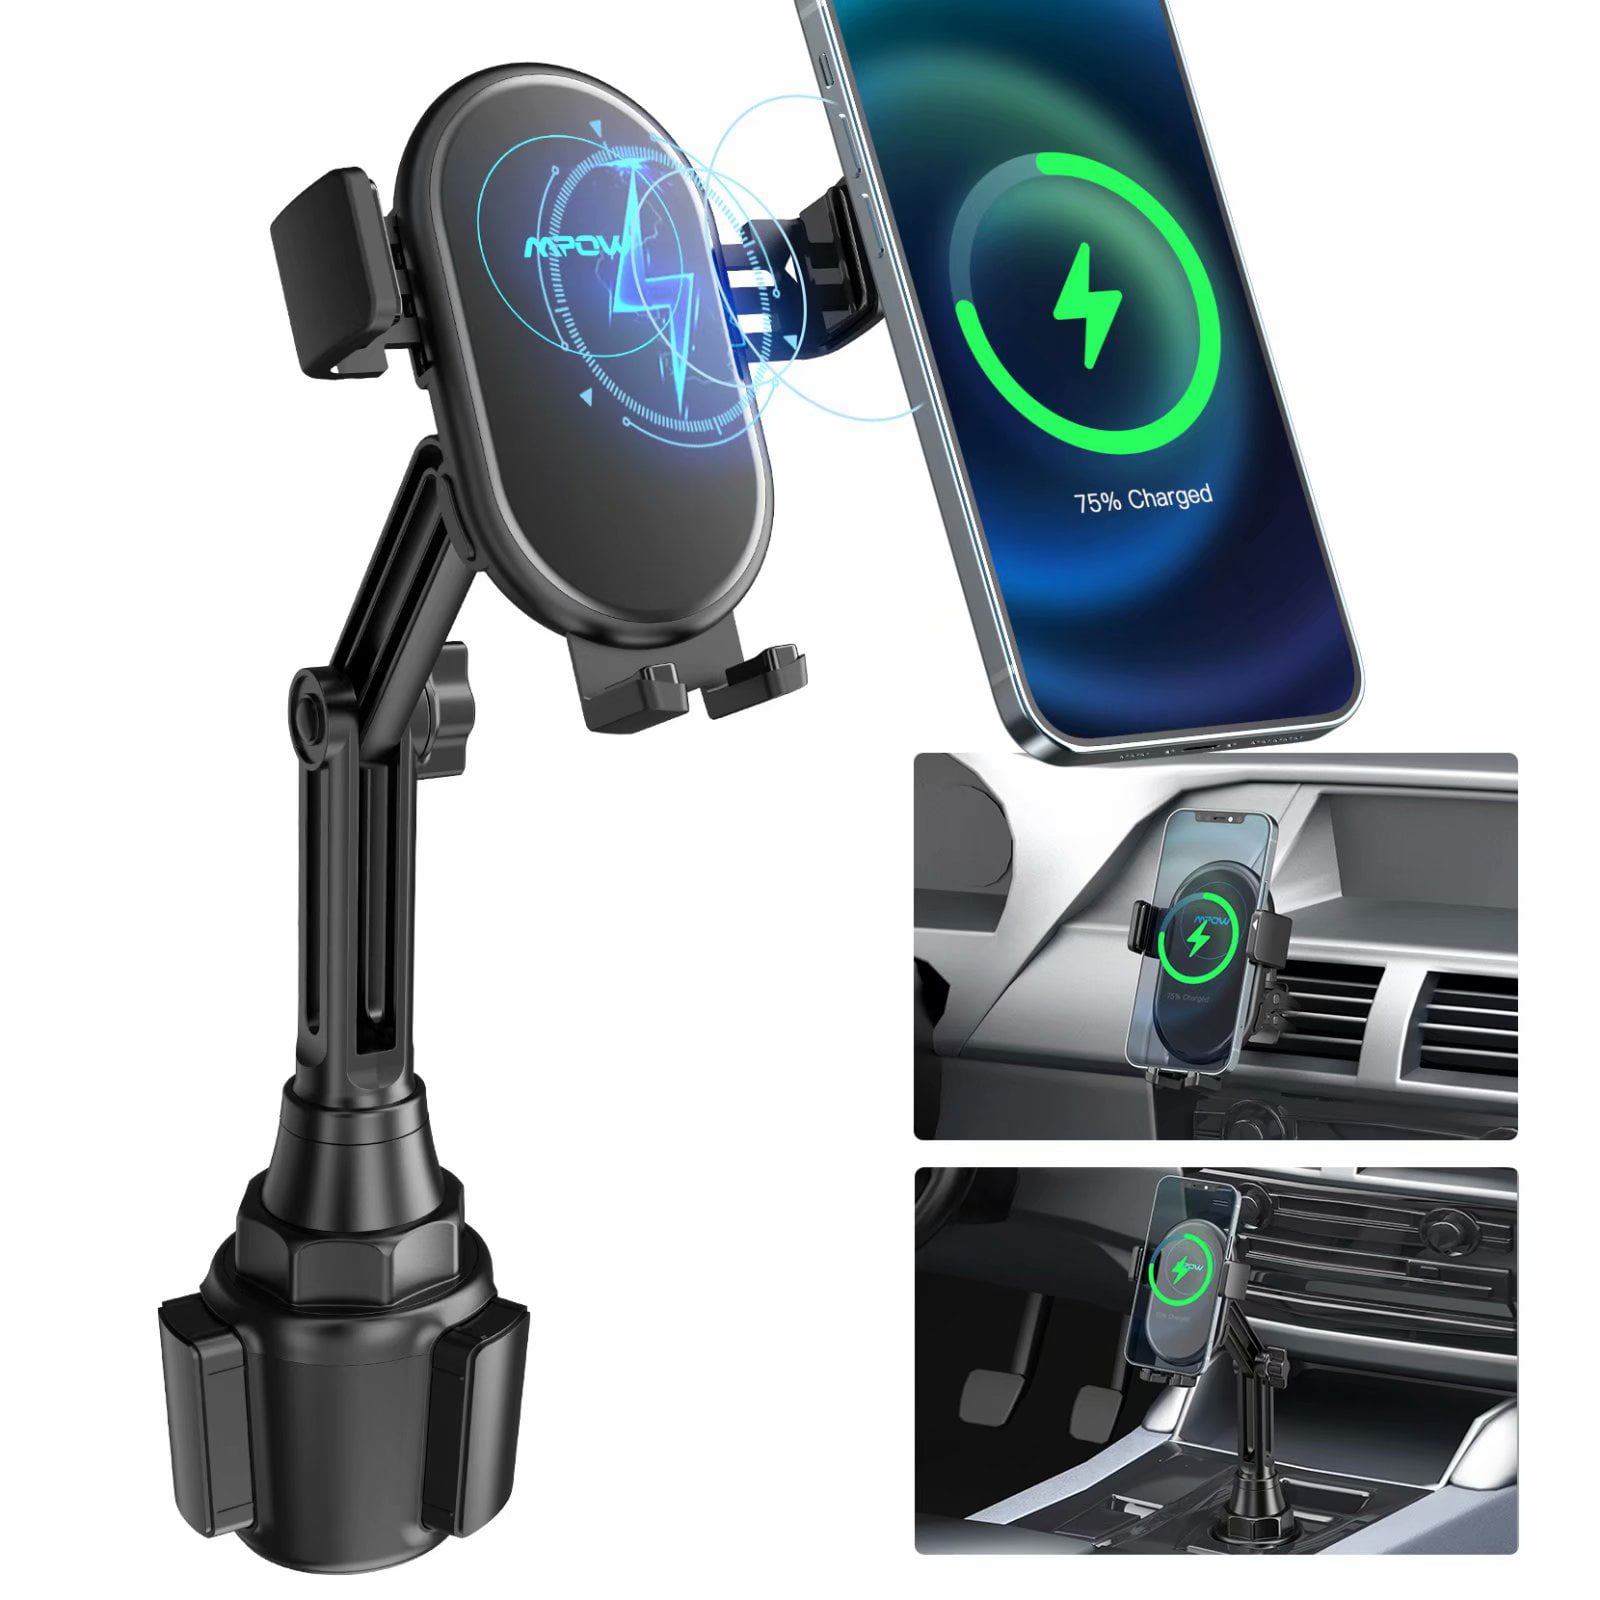 iPhone Wireless Charging Series Android Wireless Charging Series Windshield Dash Air Vent Phone Holder Compatible with Samsung Pow Wireless Car Charger 15W Qi Fast Charging Auto-Clamping Car Mount